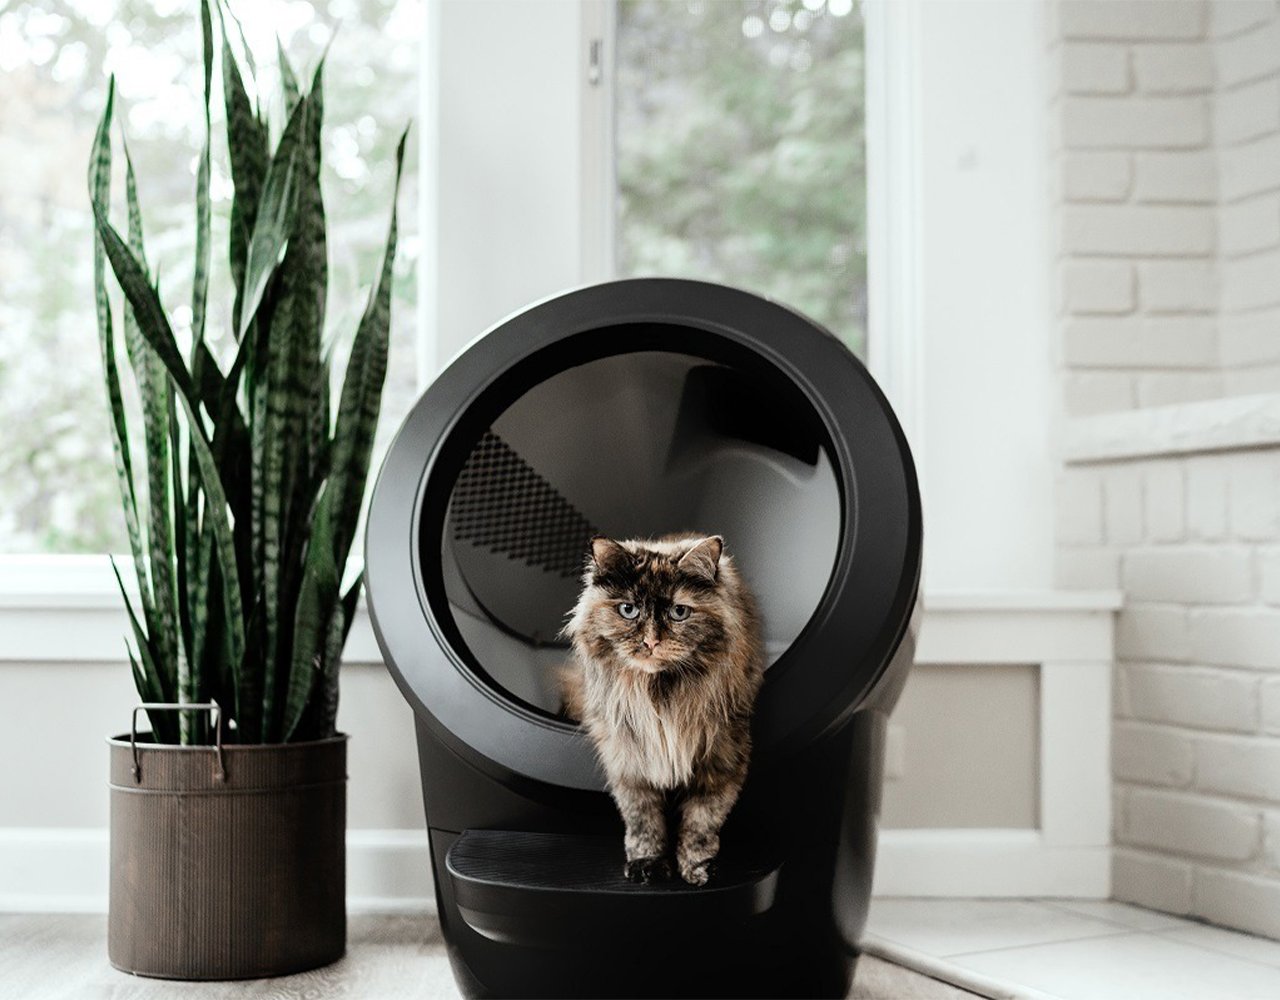 Does the Litter Robot Live Up to the Hype? A Cat Owner's Honest Review